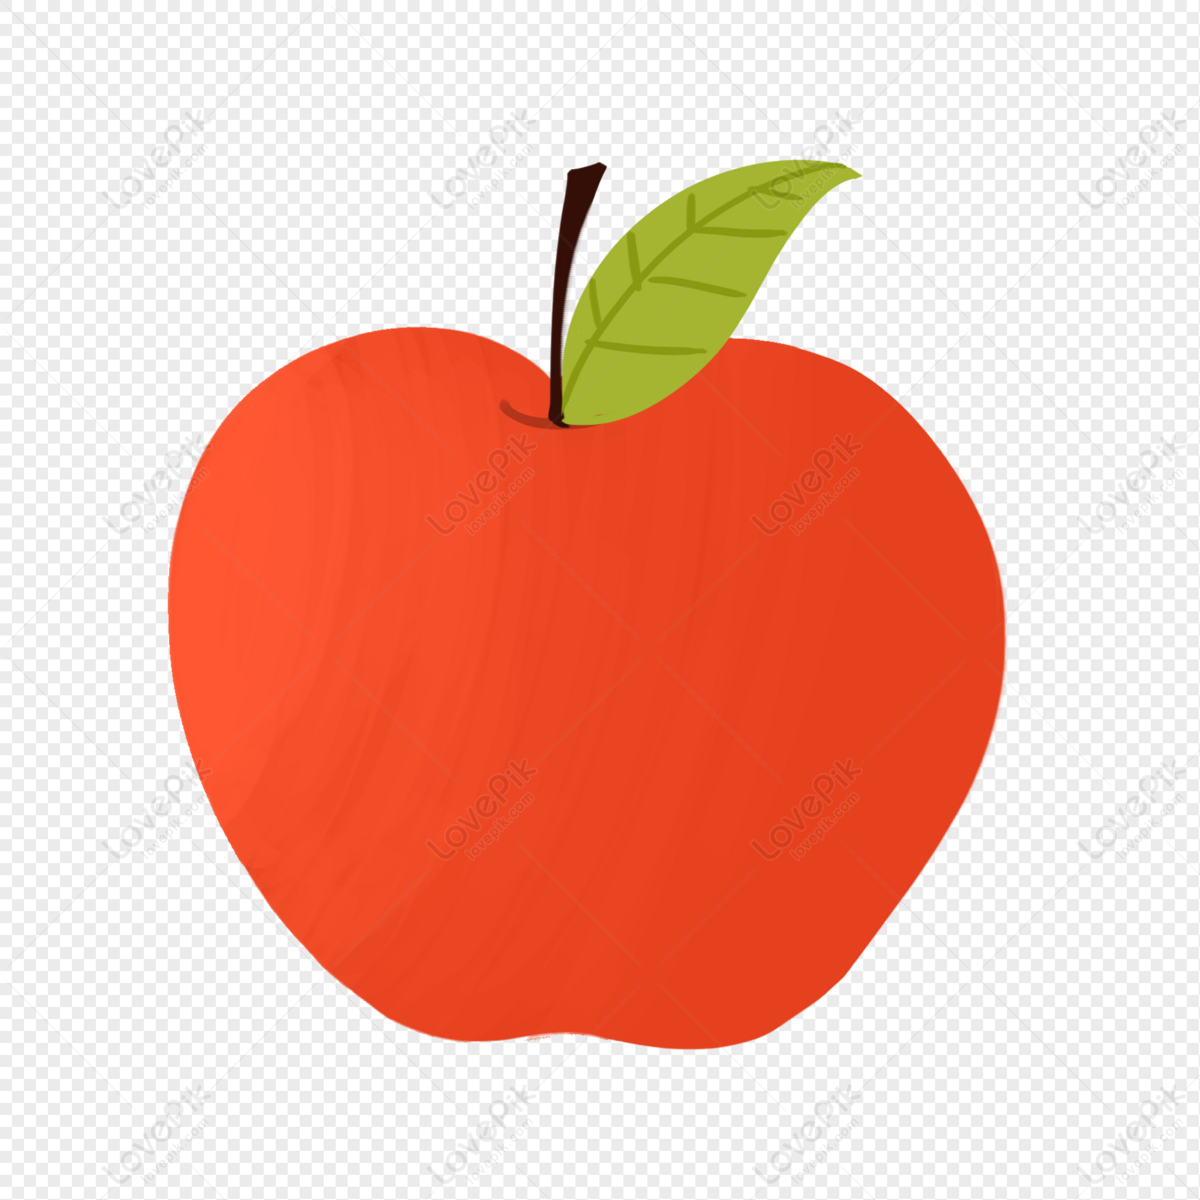 Apple PNG Hd Transparent Image And Clipart Image For Free Download ...